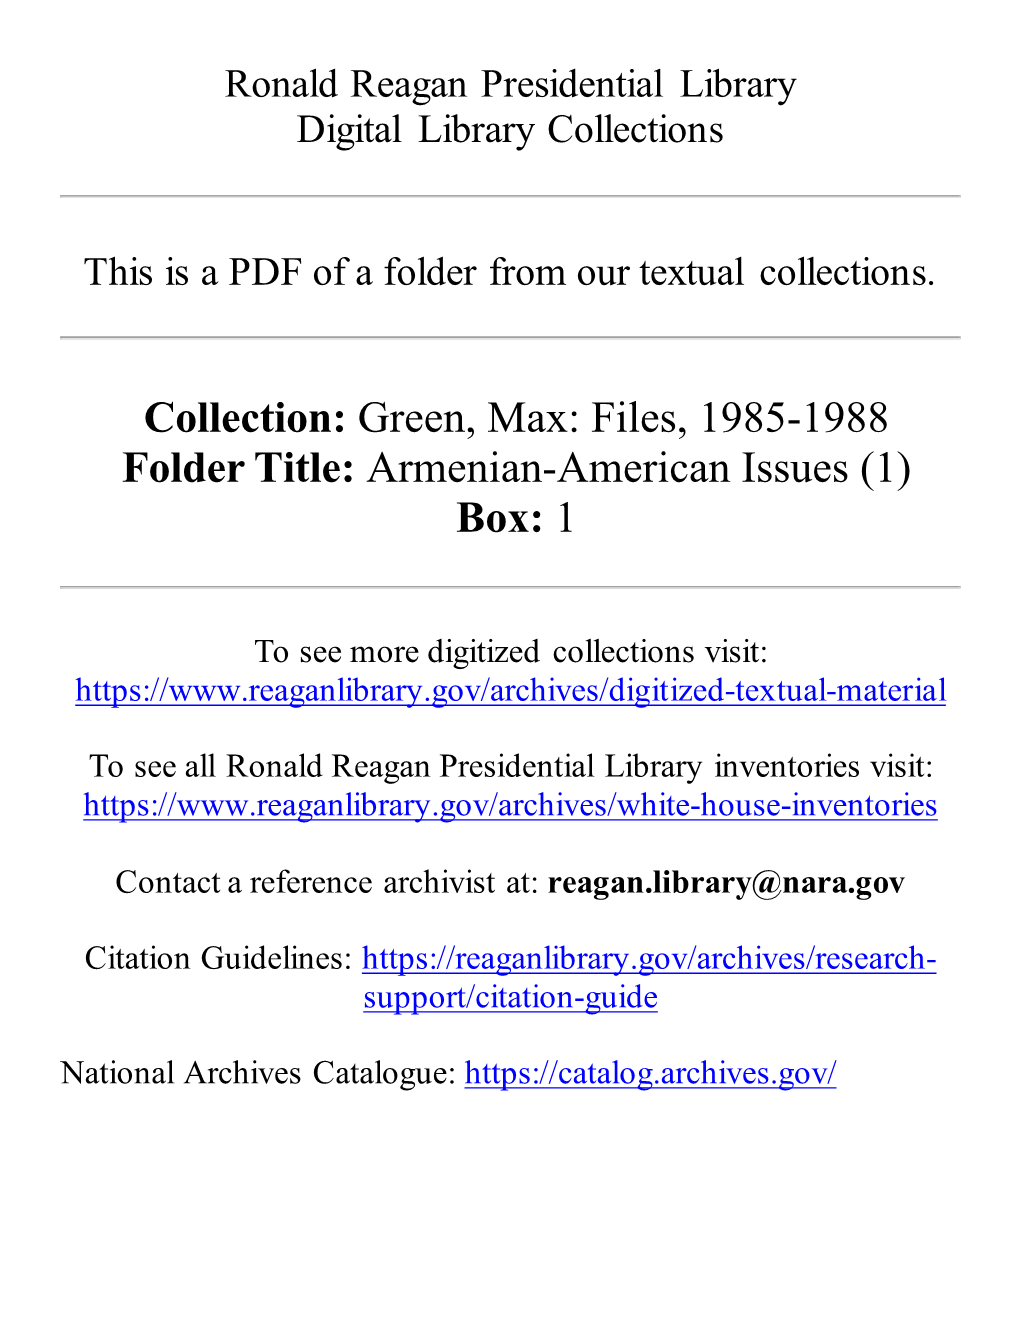 Collection: Green, Max: Files, 1985-1988 Folder Title: Armenian-American Issues (1) Box: 1